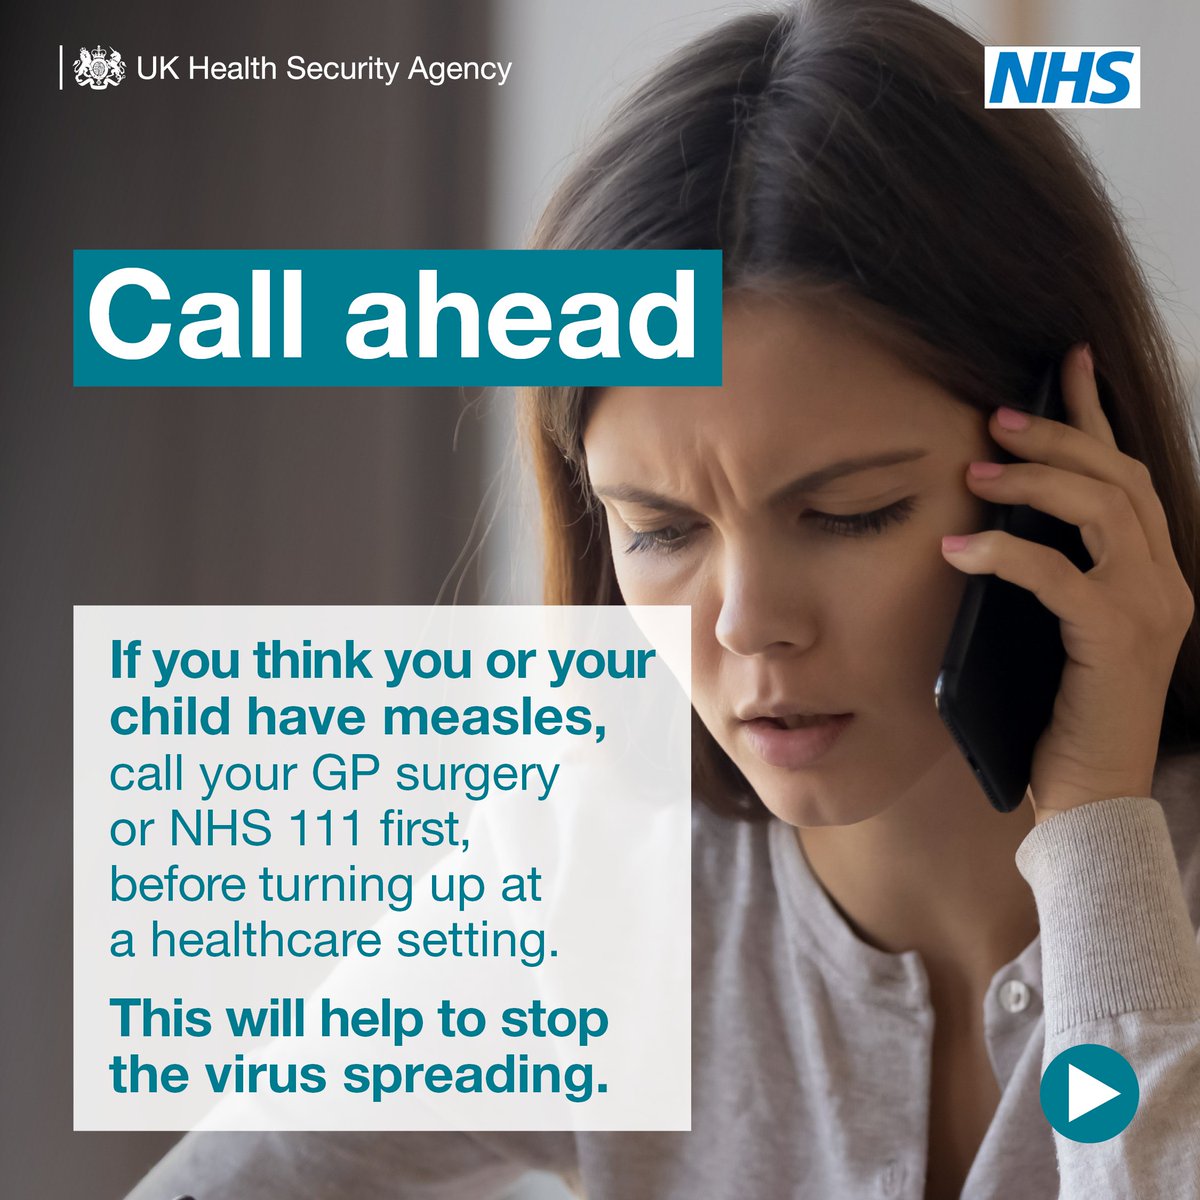 Here’s what you need to know about #measles, from the signs and symptoms to look for to what to do if you think you or your child has measles.